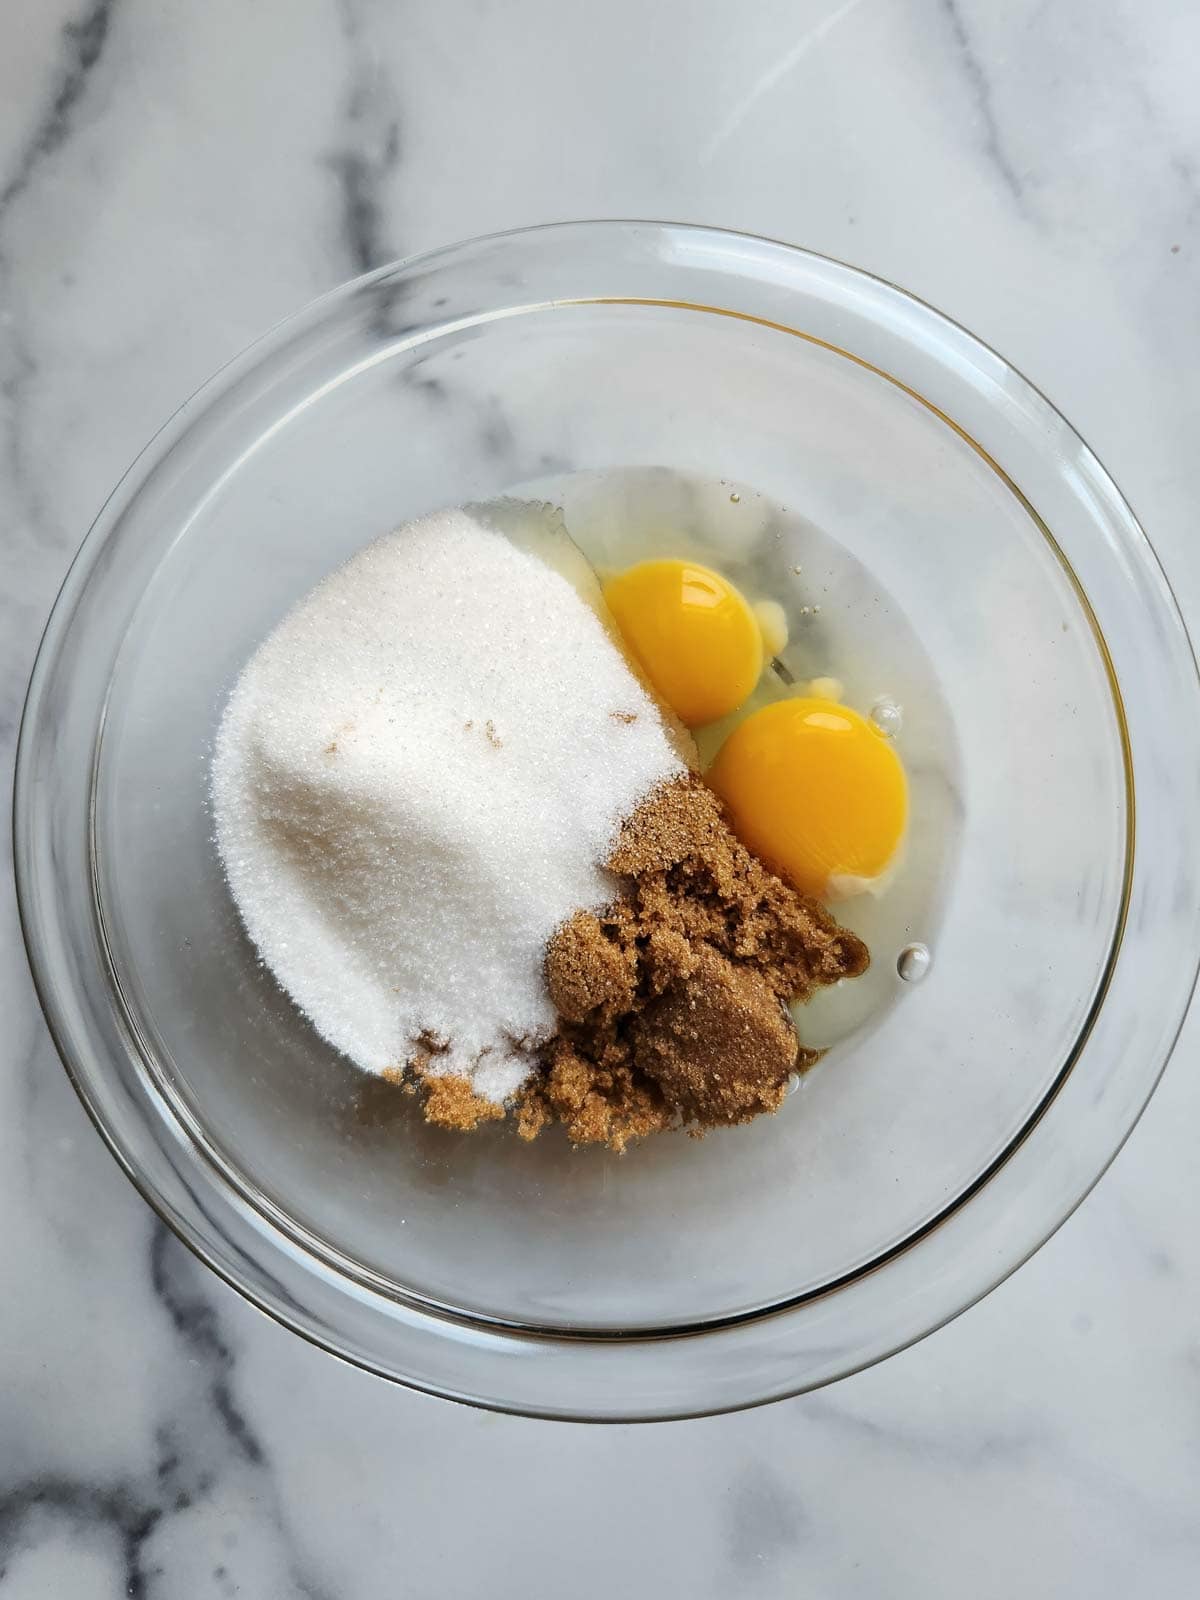 Eggs and sugar in a clear bowl.